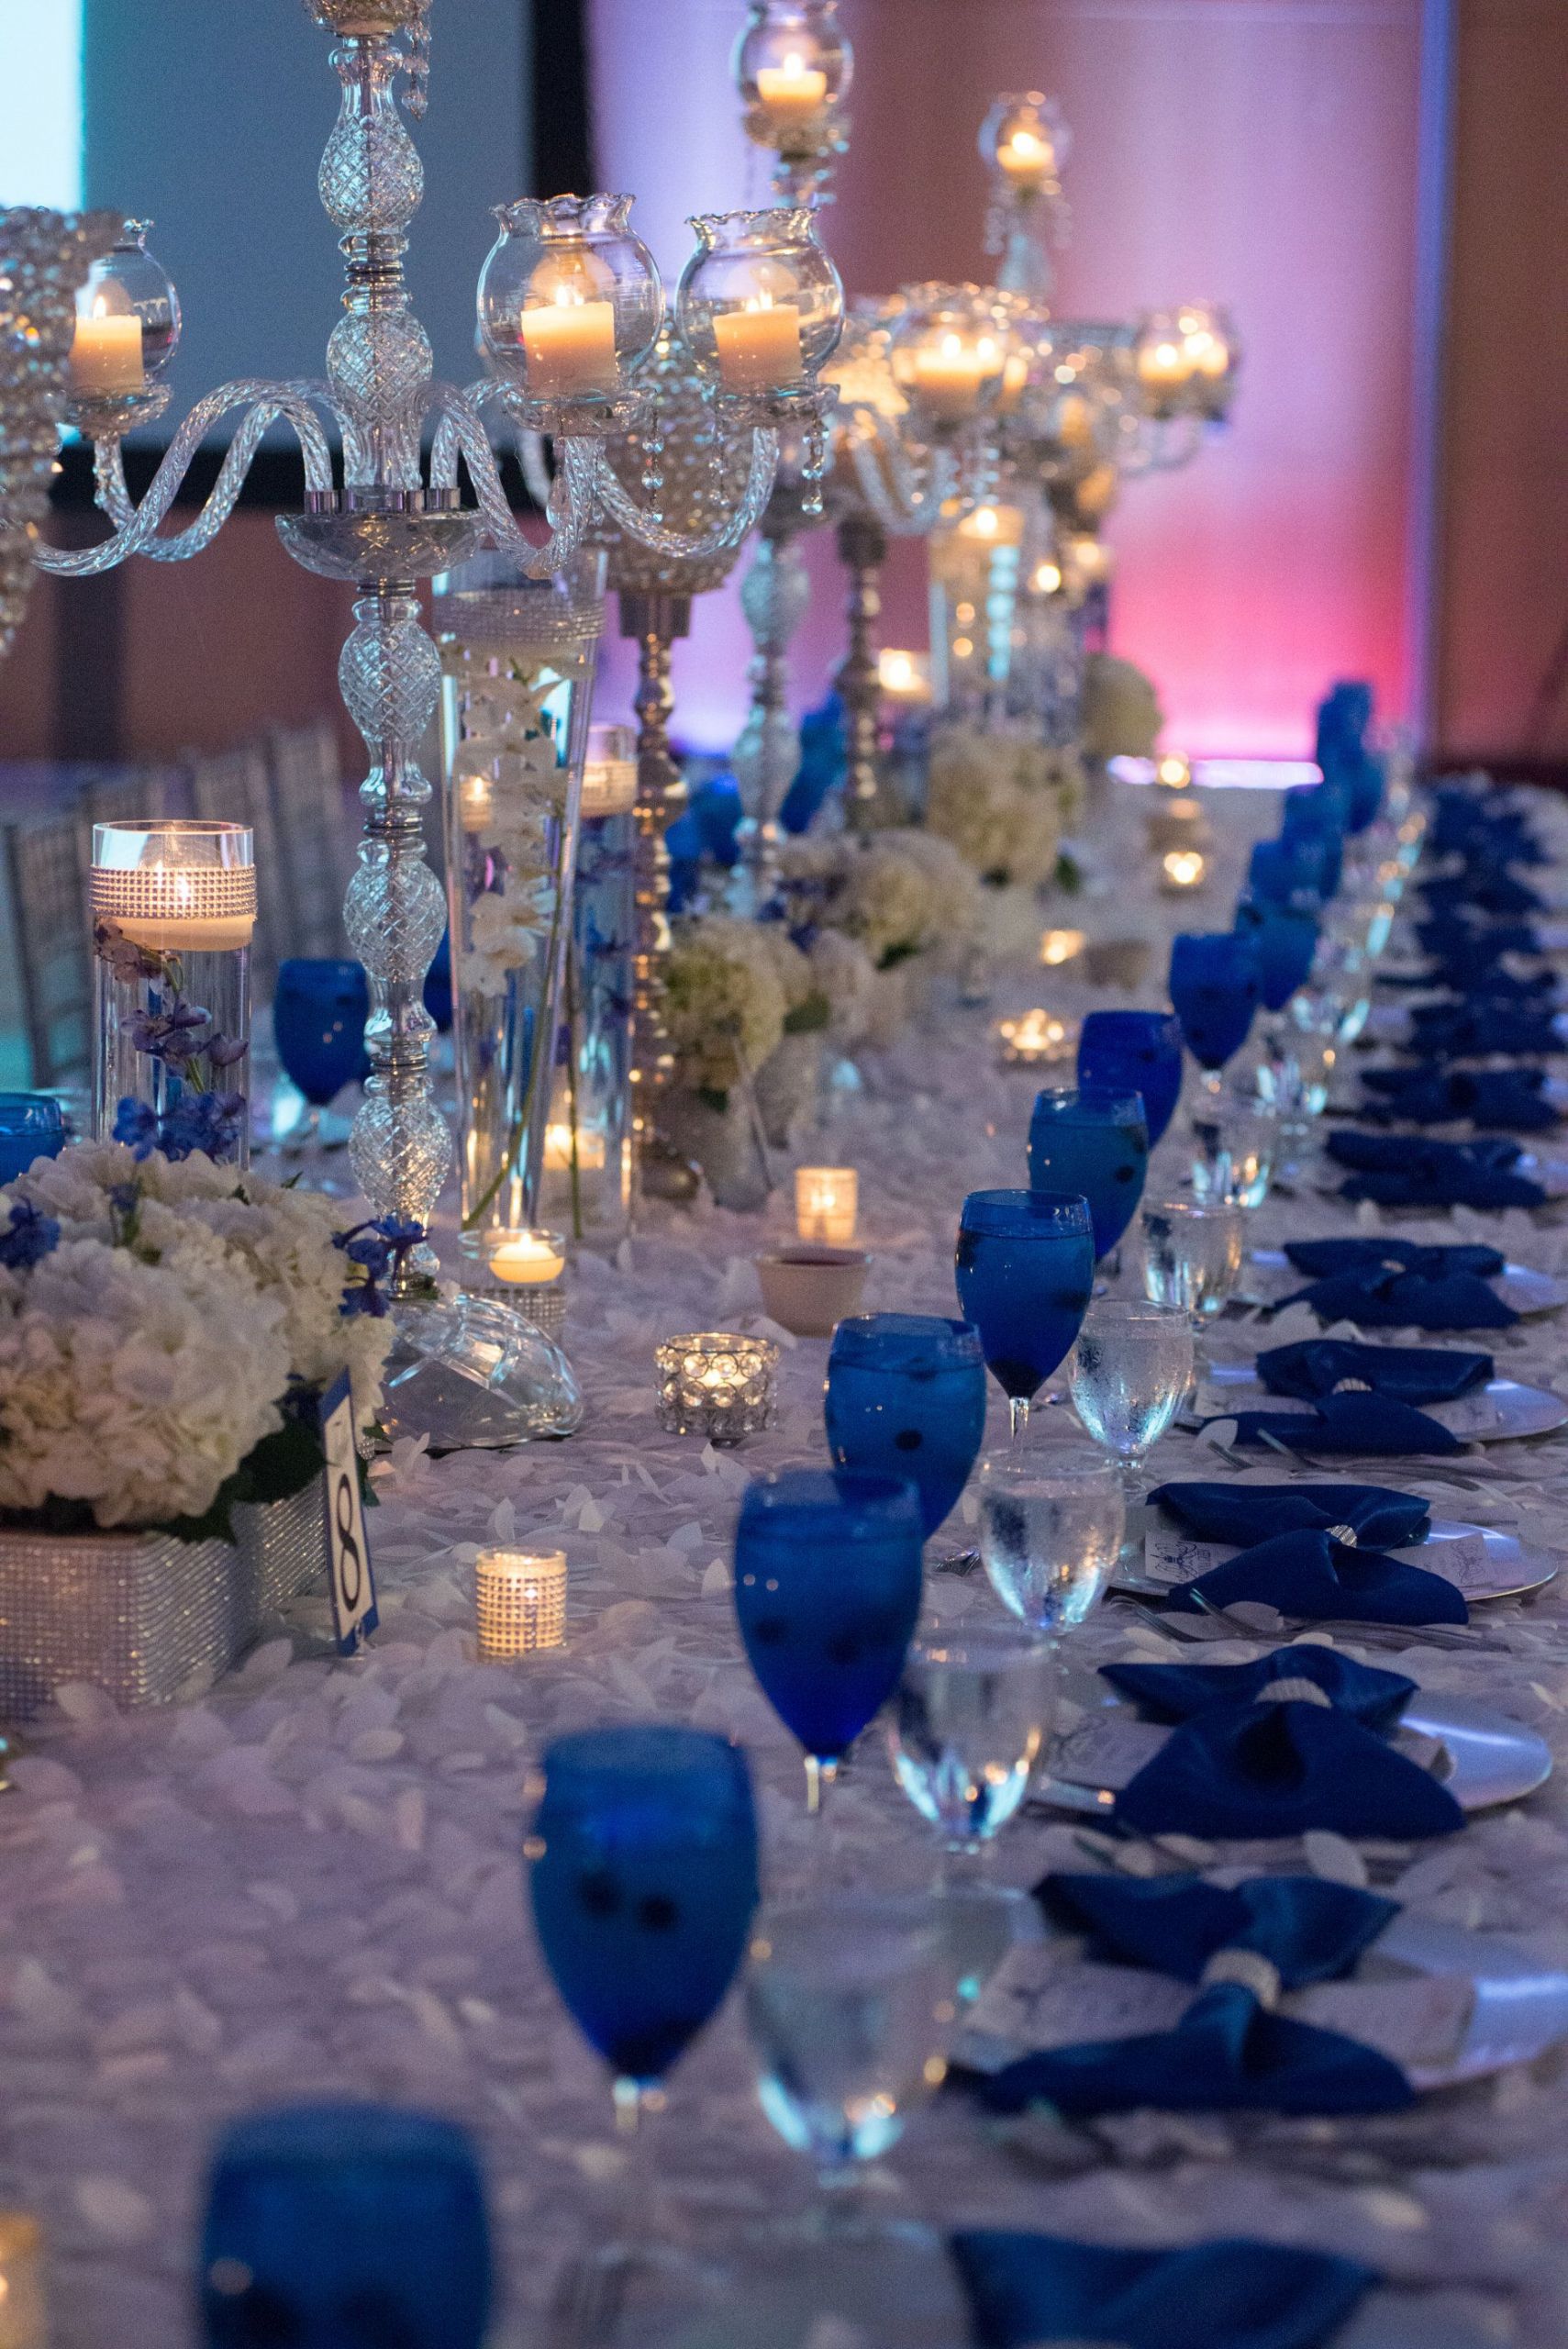 Royal Blue And Silver Wedding Decorations
 Our Royal Blue Wedding Family Styled Seating Reception